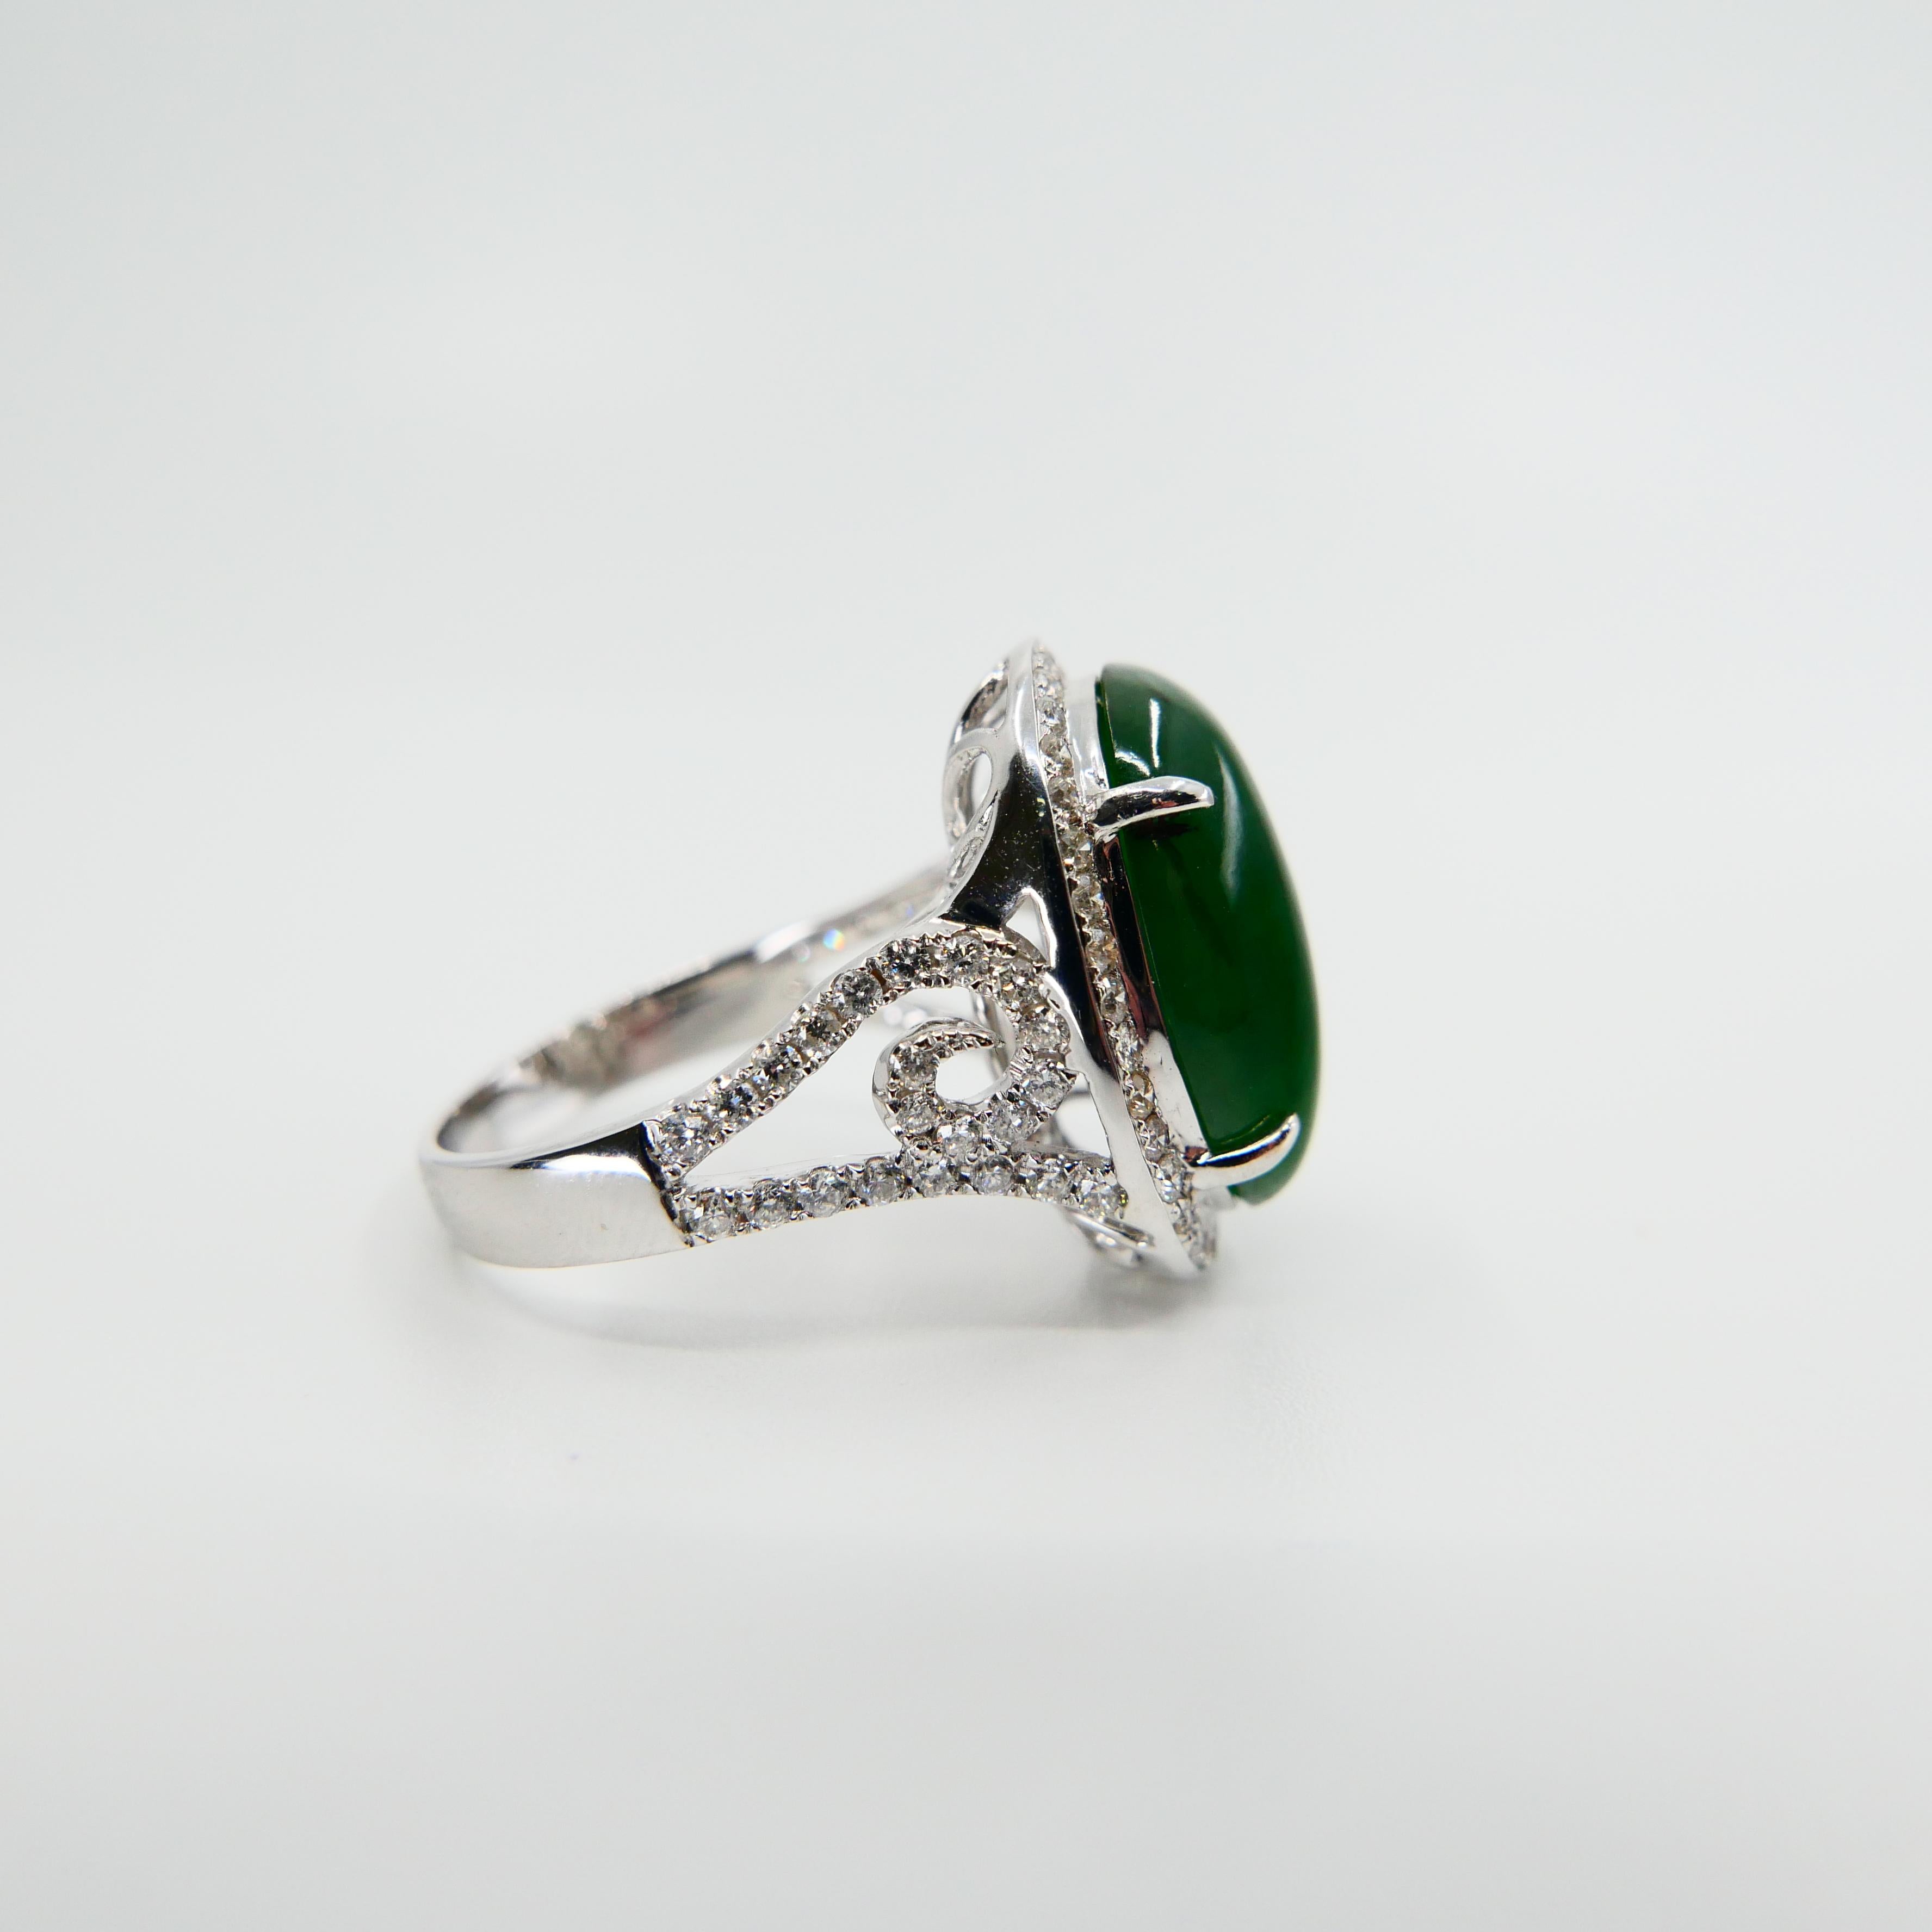 Certified Type A Jadeite Jade & Diamond Cocktail Ring, Intense Green Subtle Glow For Sale 4